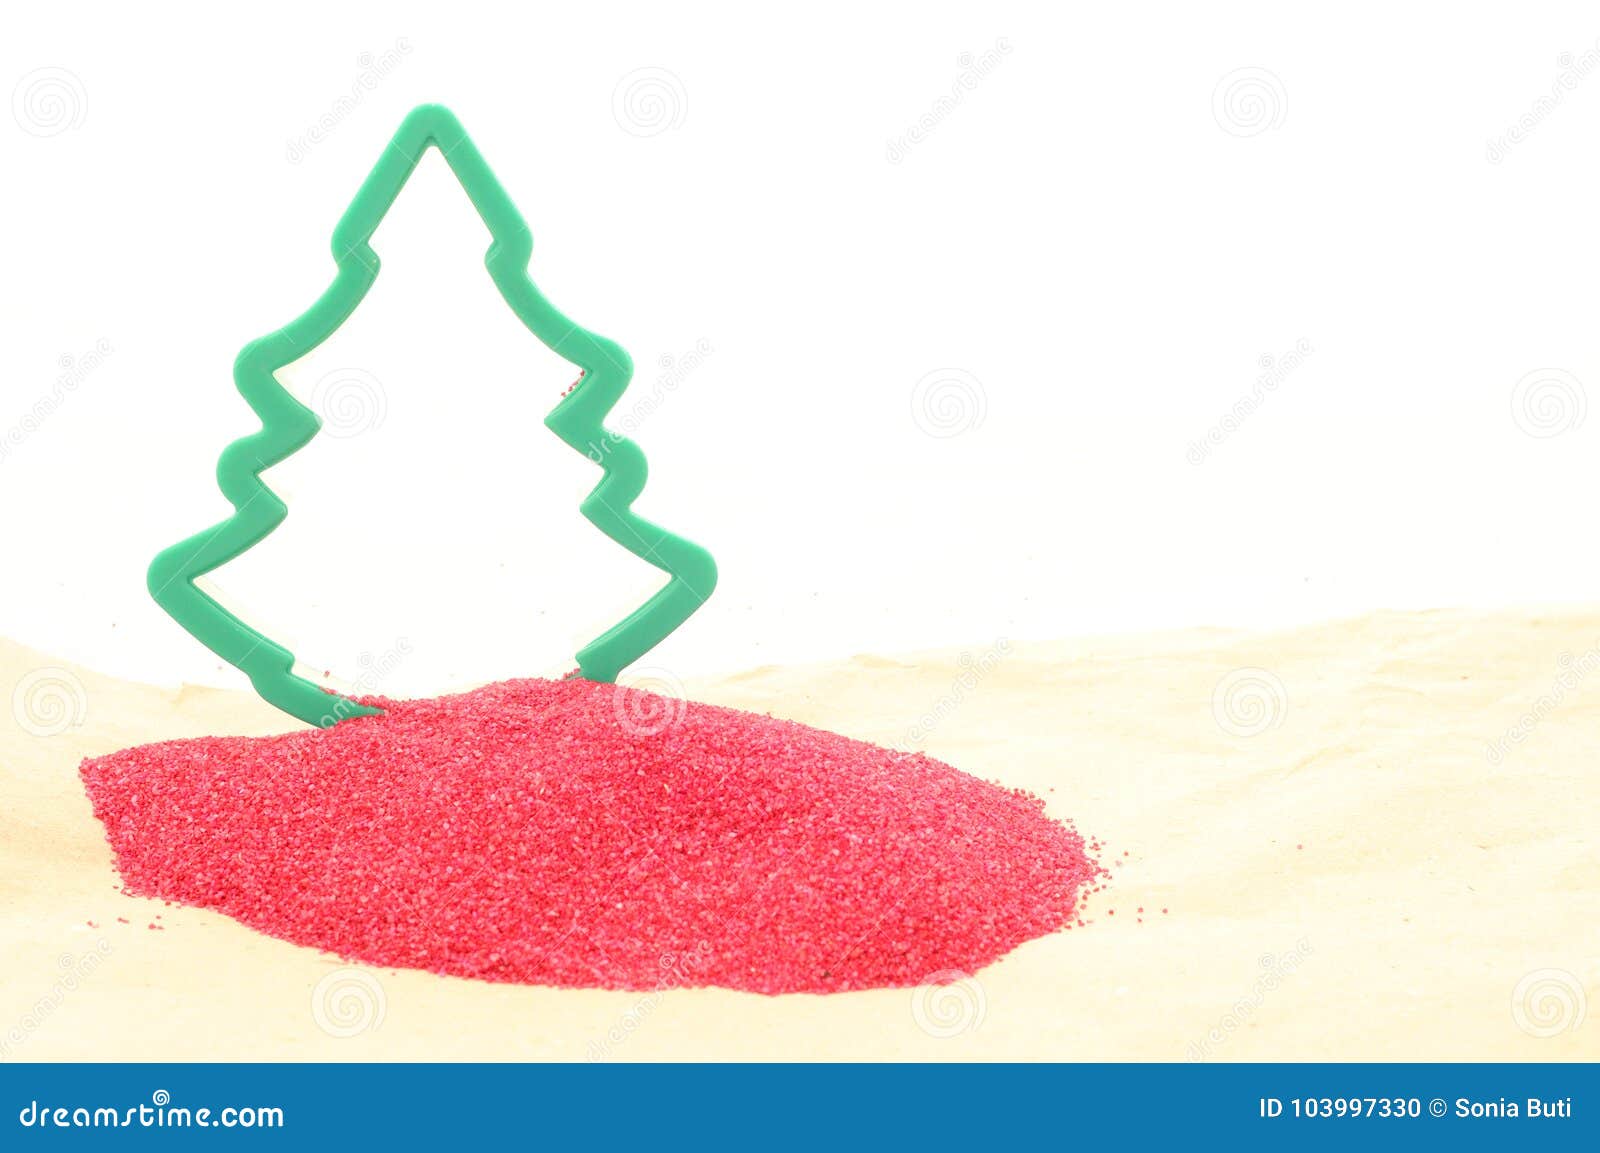 Silhouette of a Christmas tree on a pile of purplish red